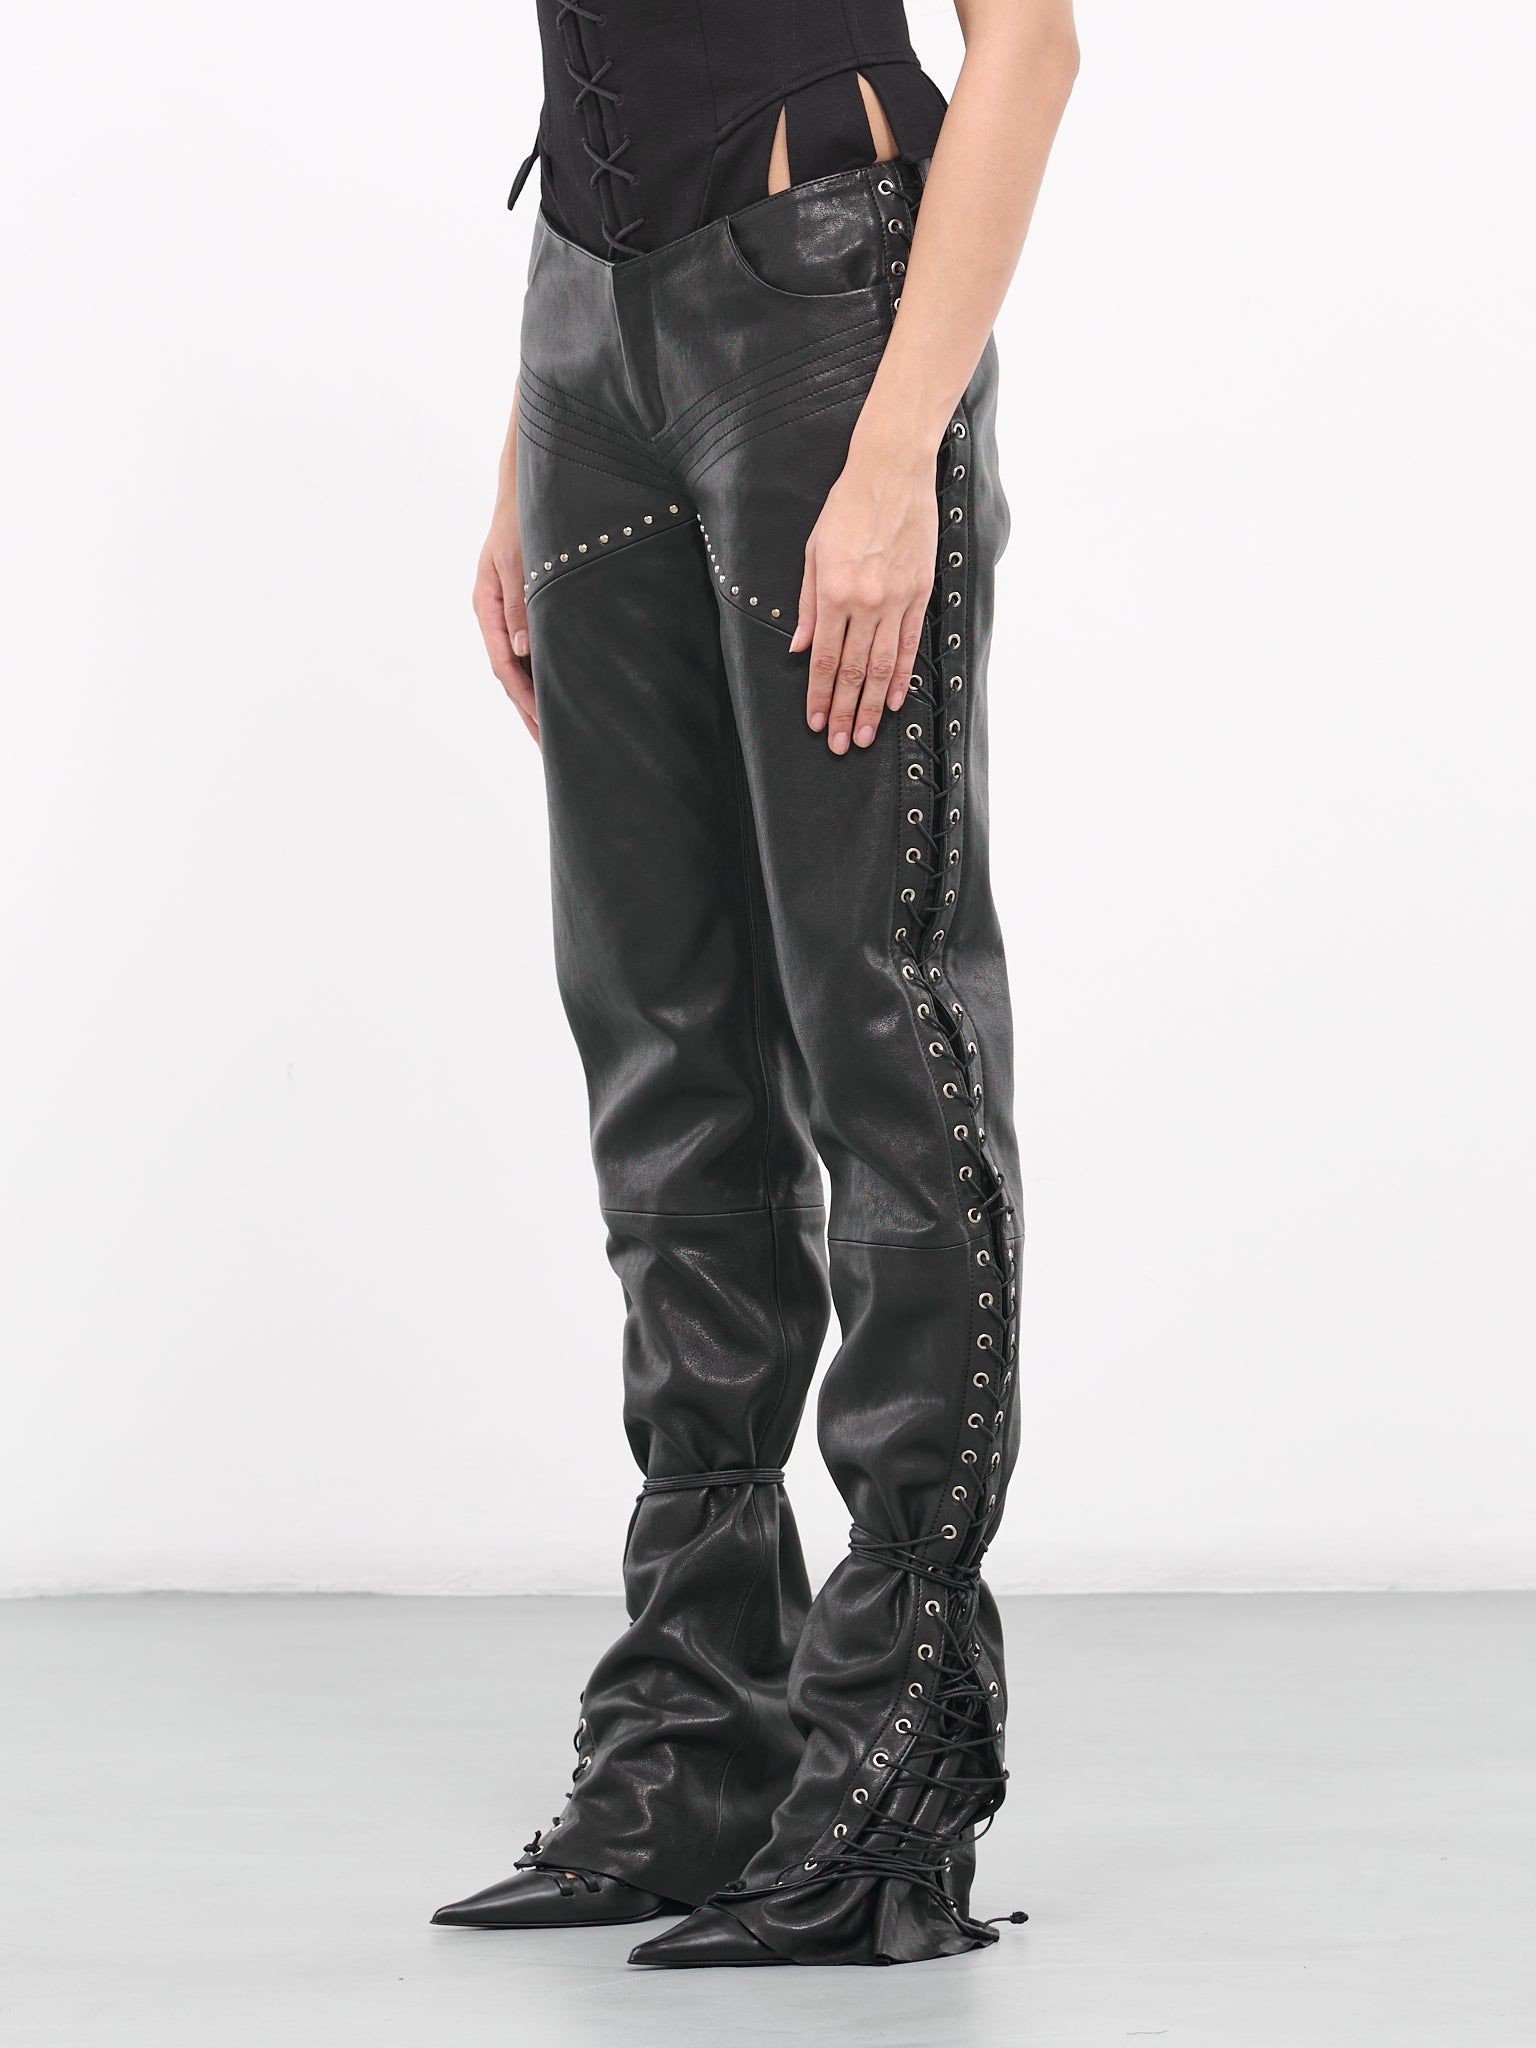 Hard Candy Leather Trousers (031-HARD-CANDY-BLACK)